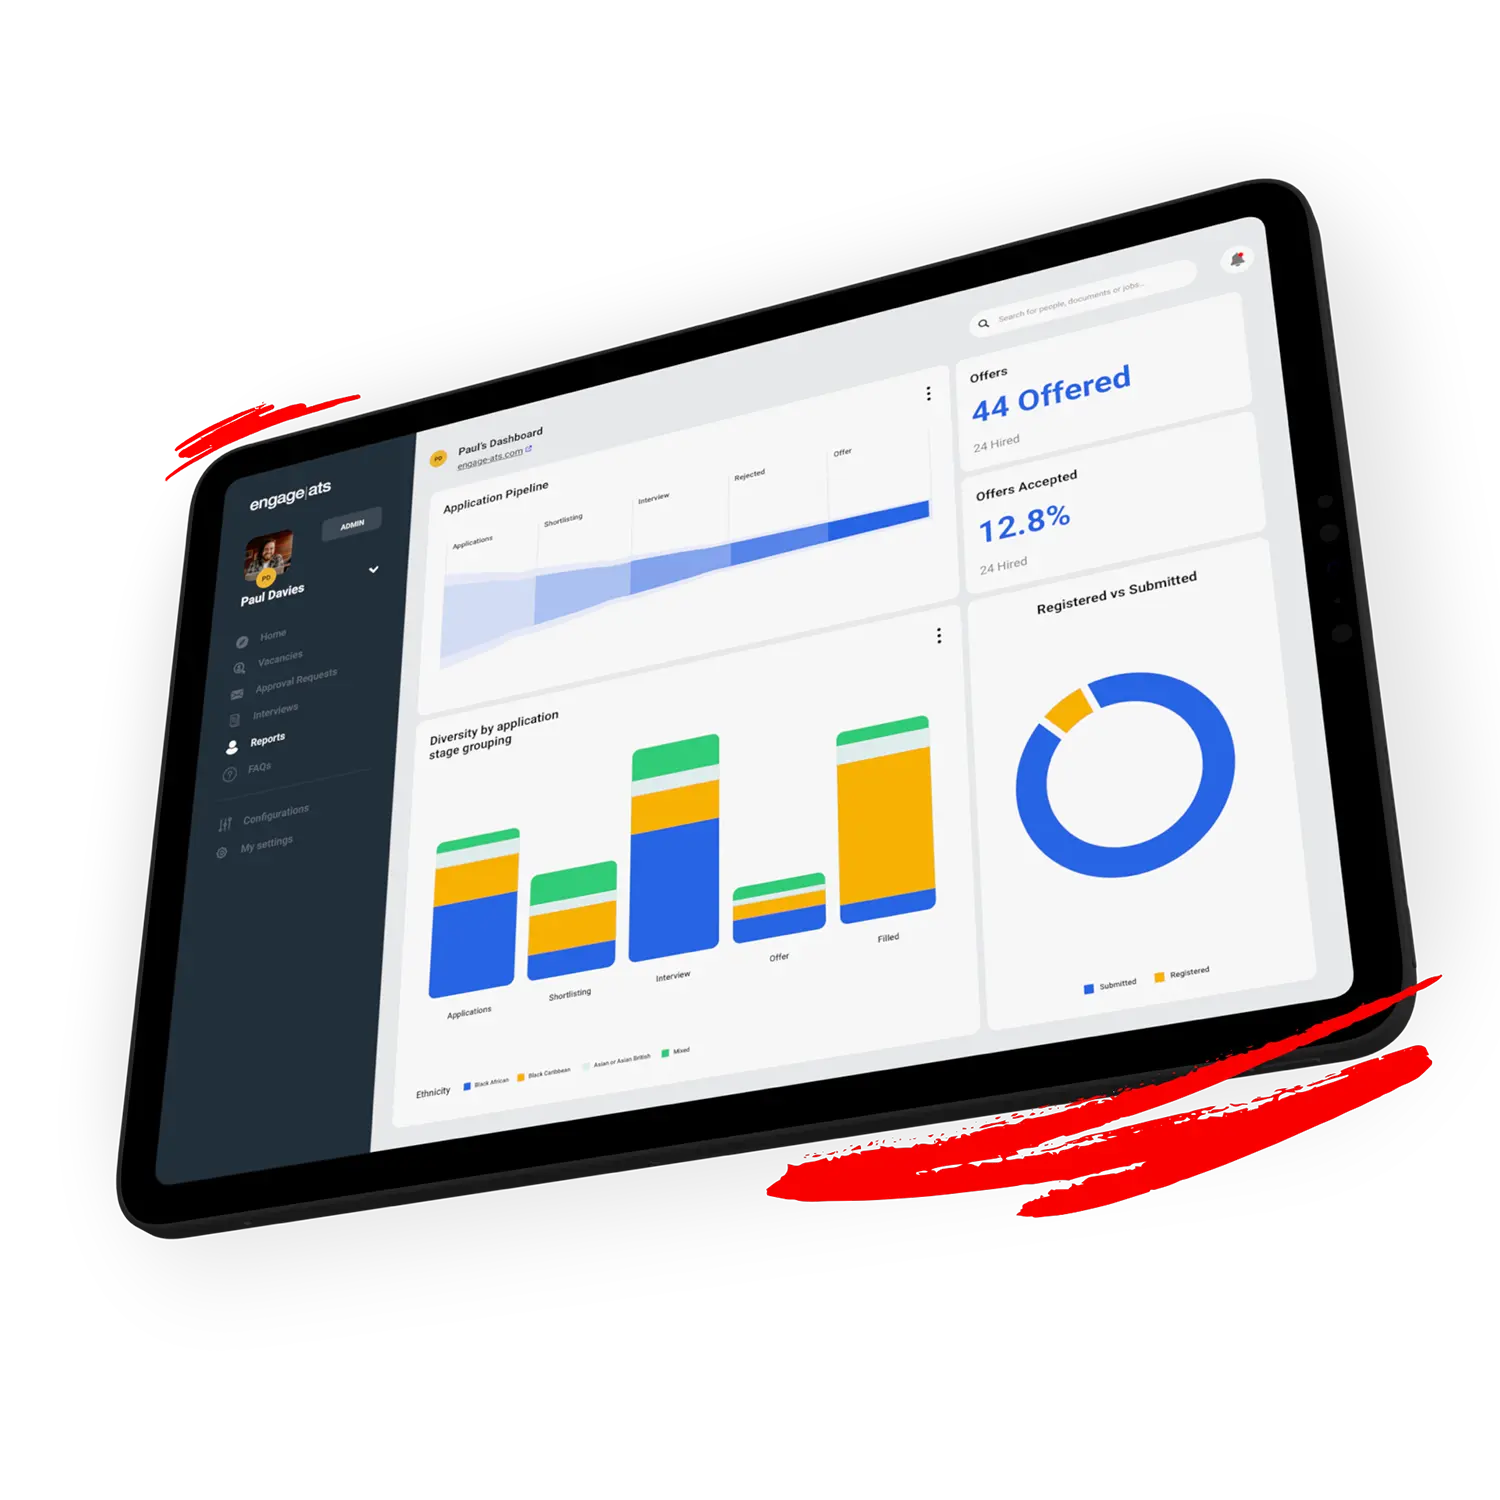 engage|ats reporting dashboard in a tablet